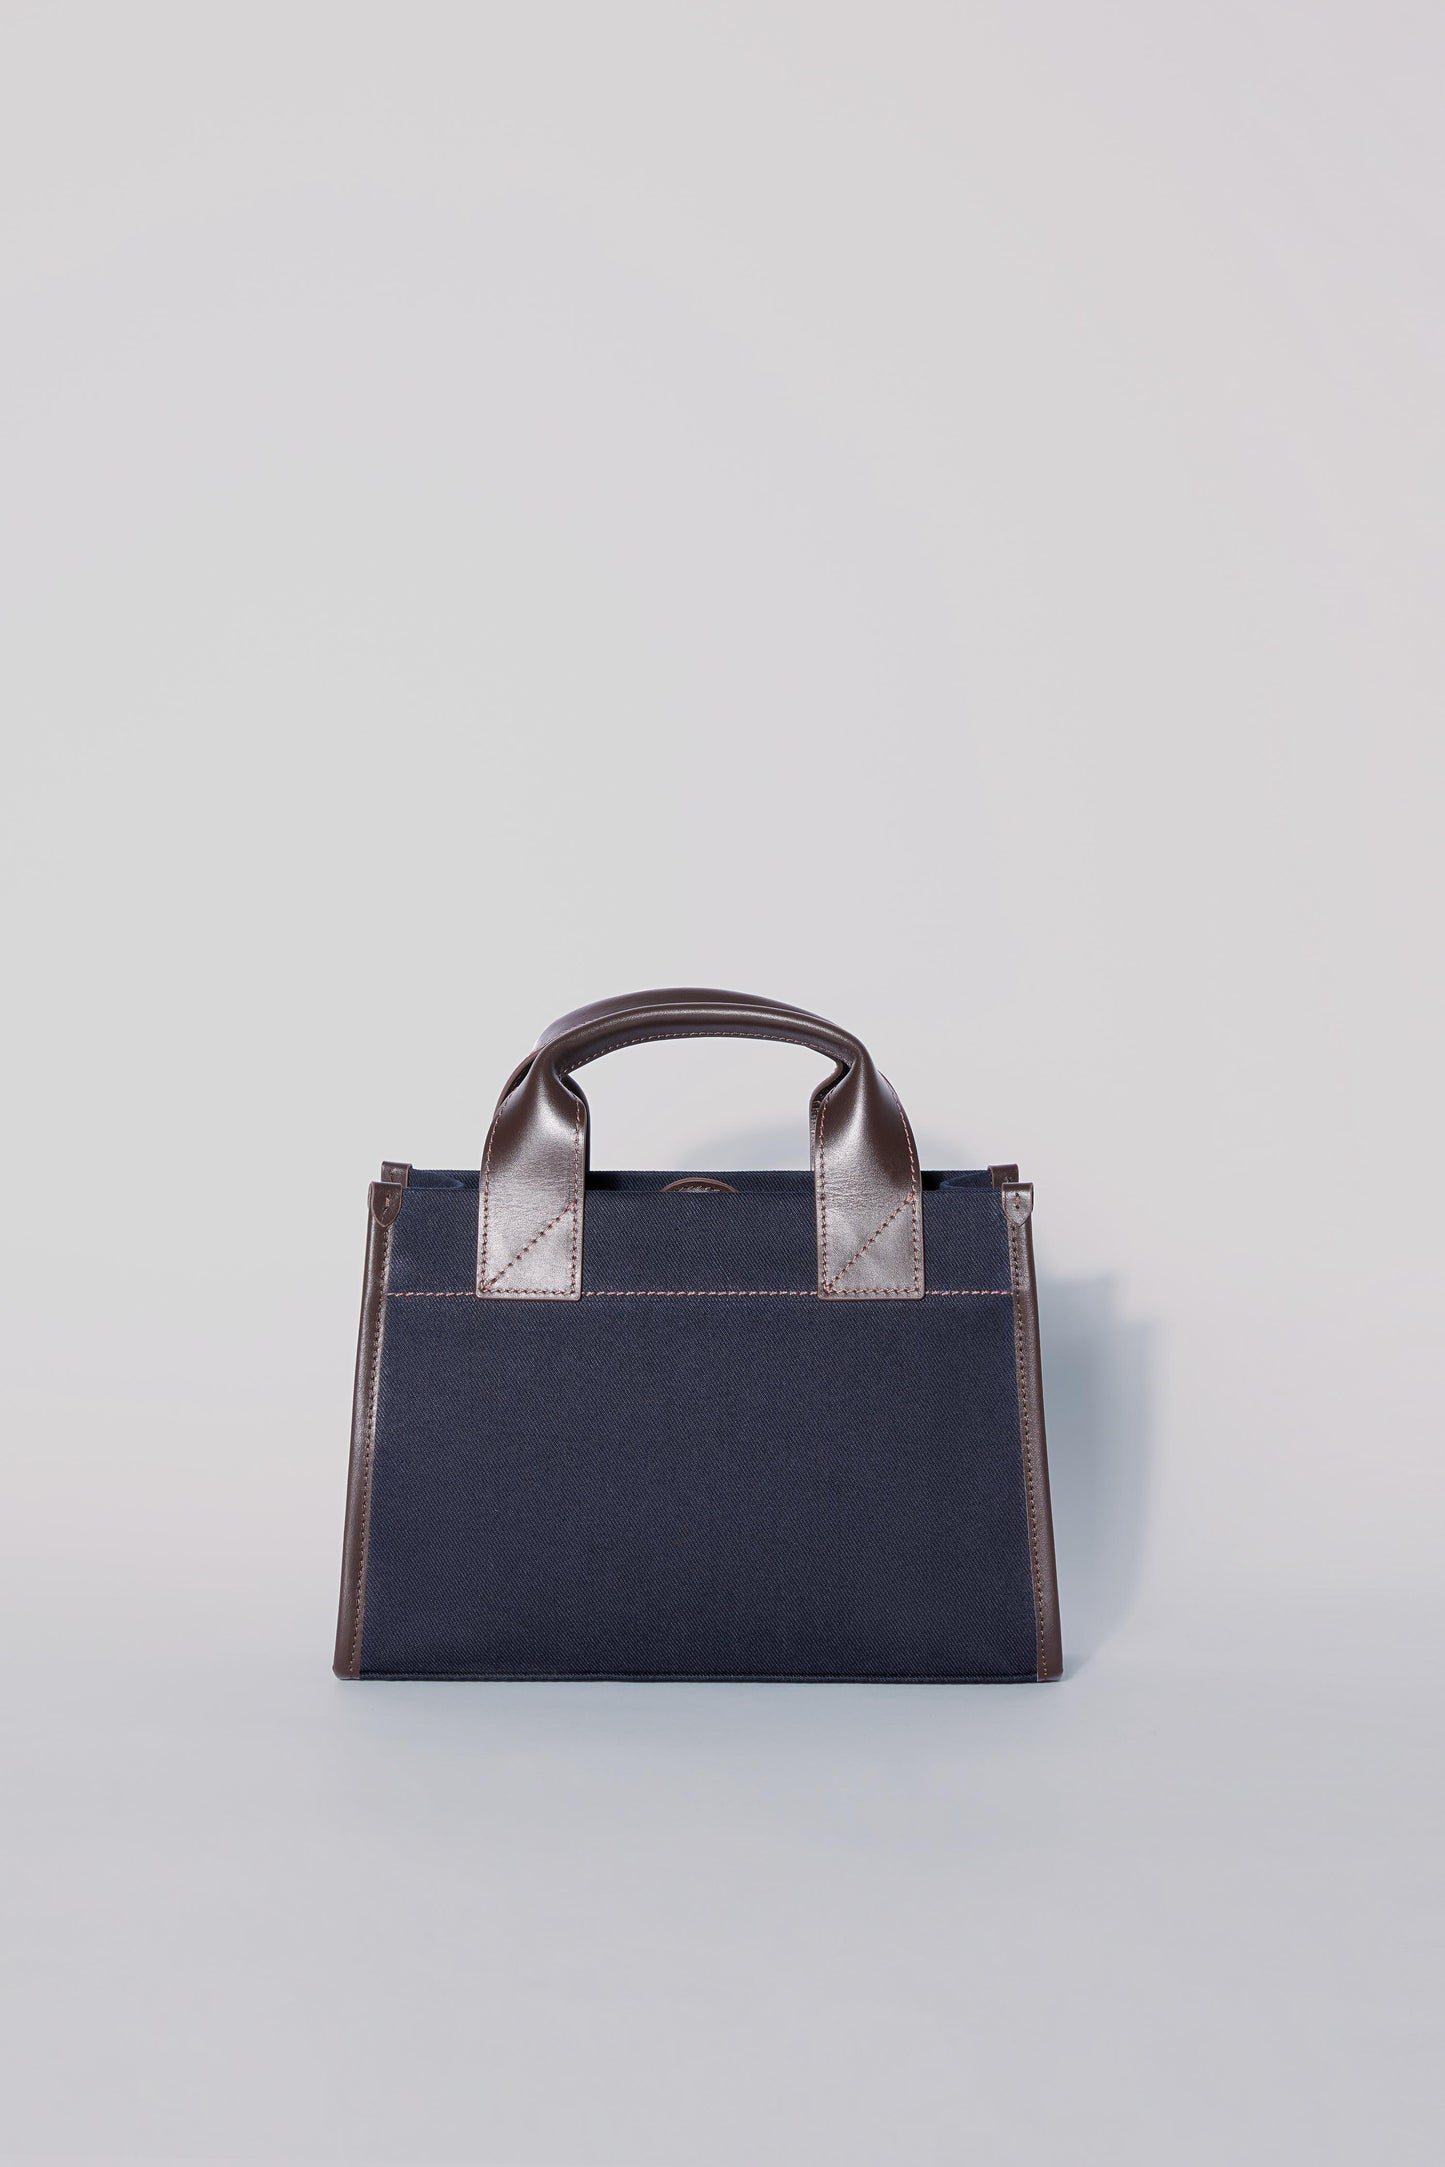 STITCHED POCKET MINI TOTE IN NAVY AND BROWN